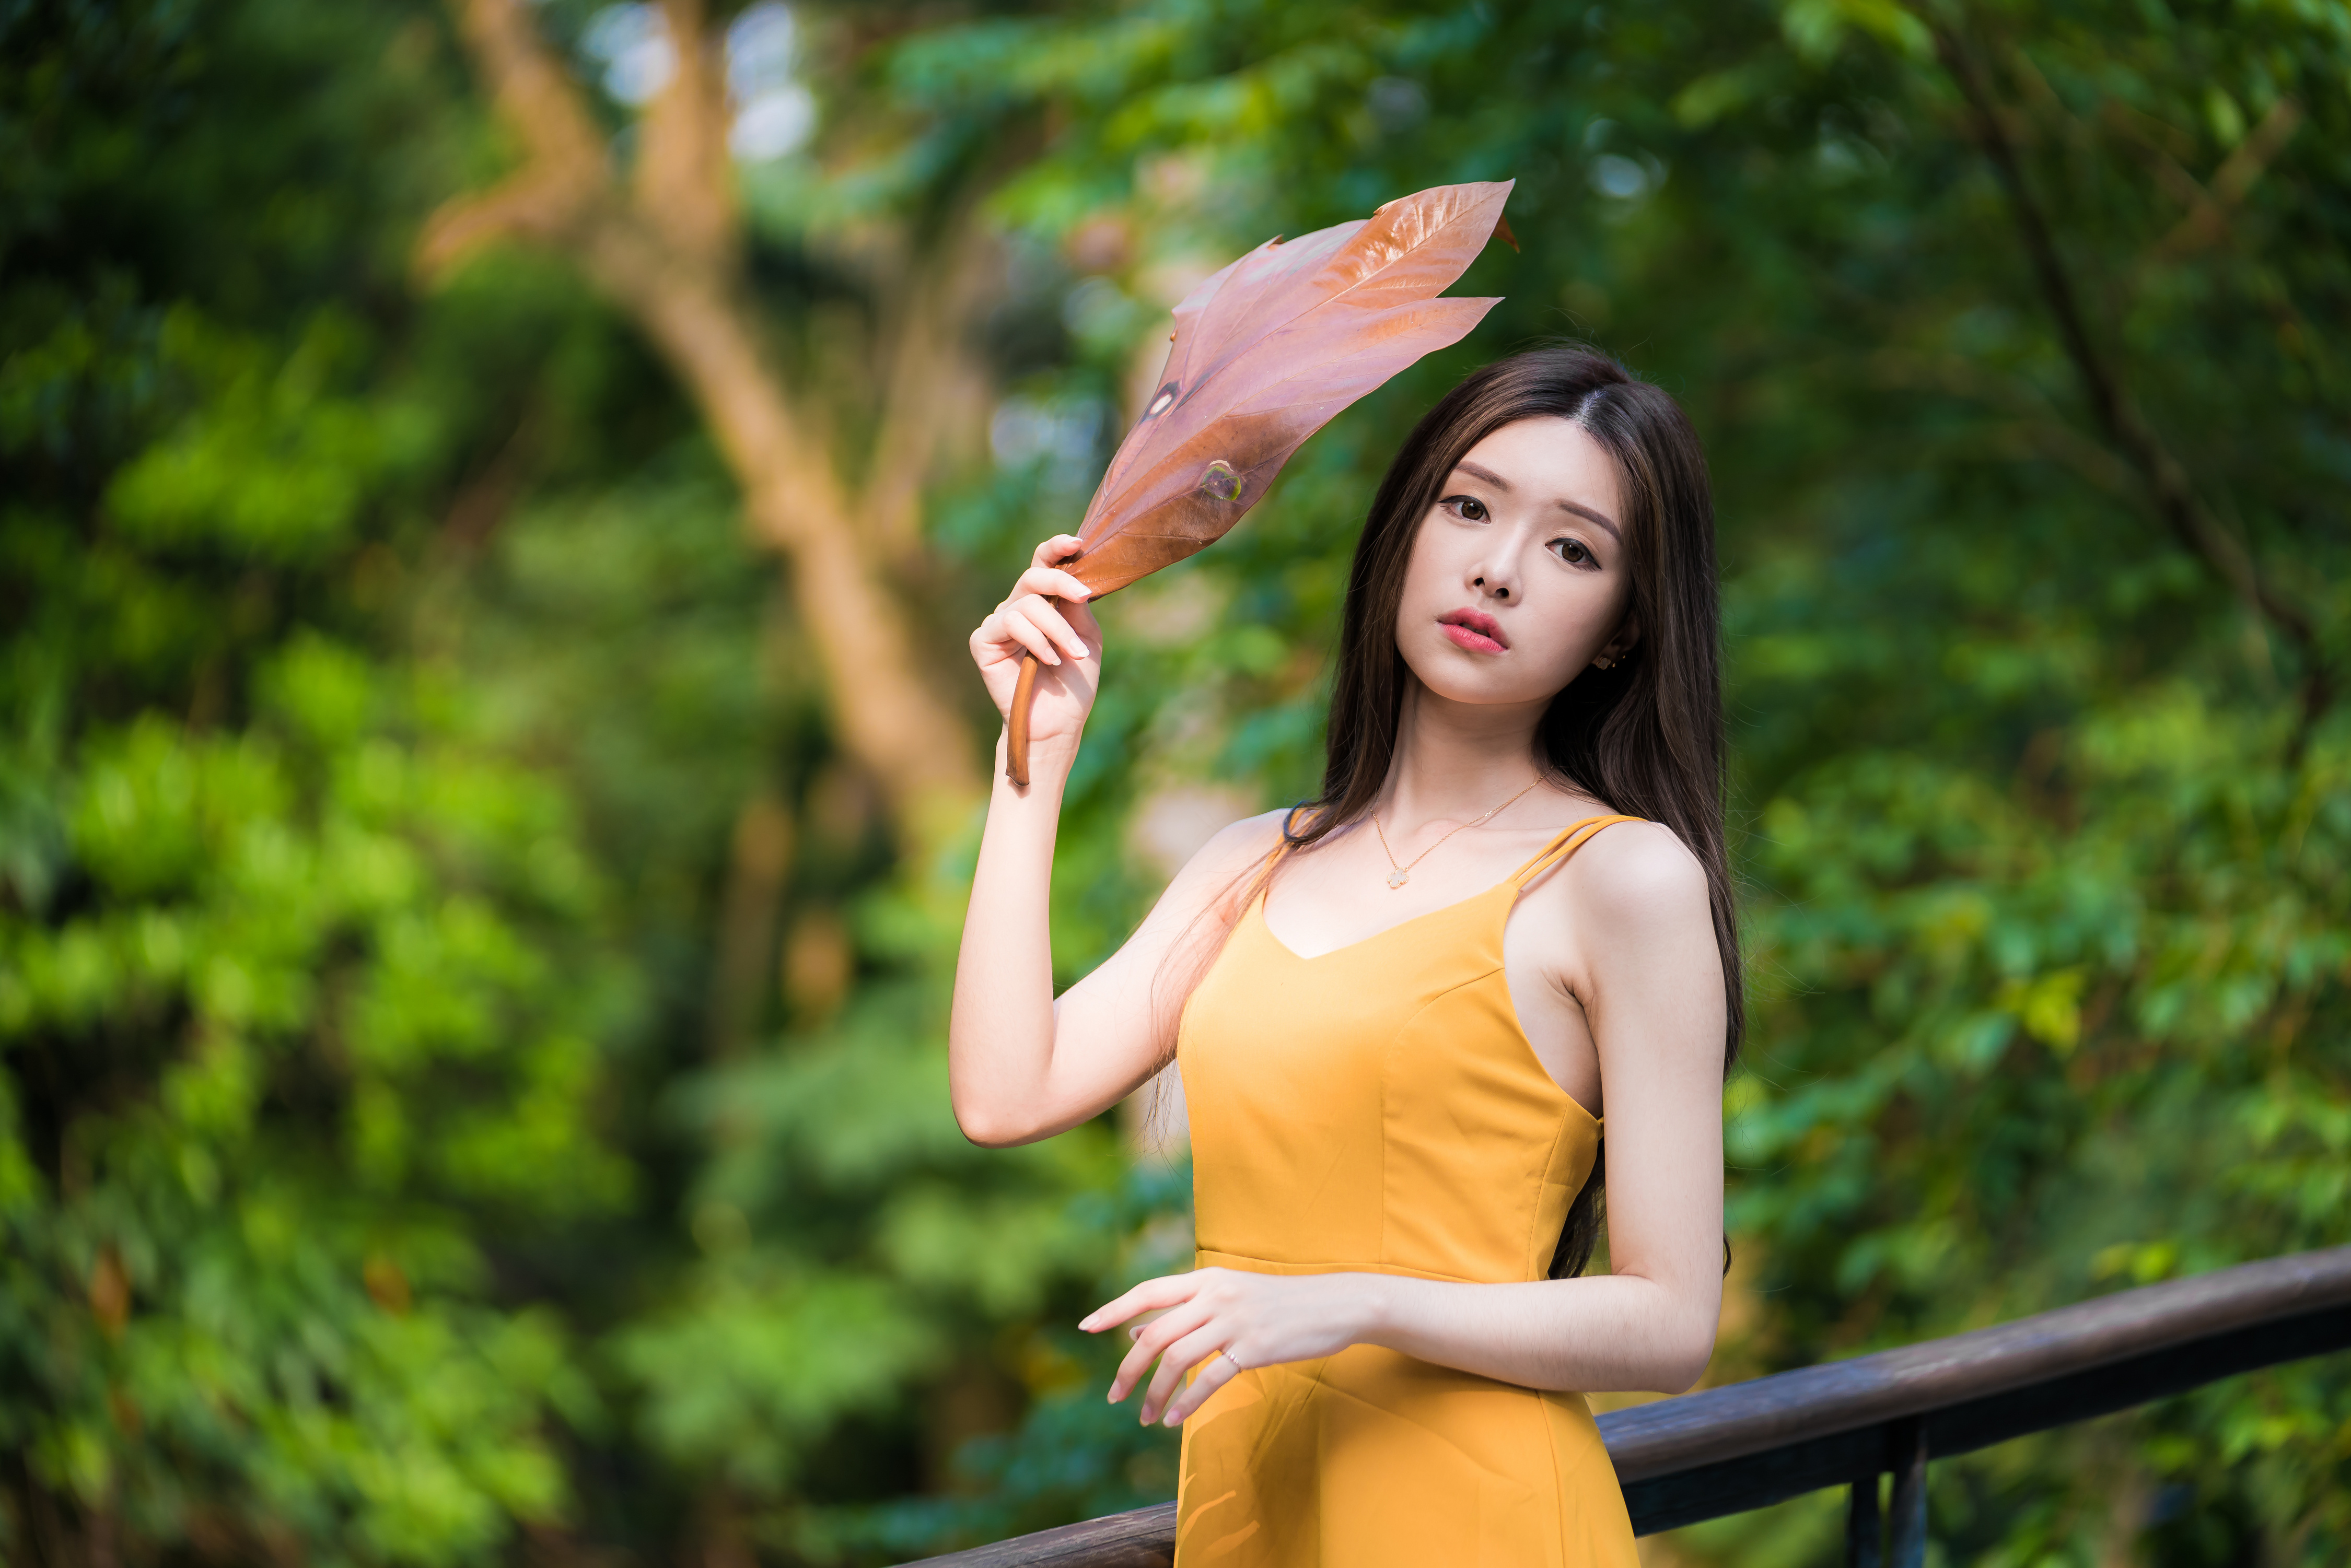 Asian Model Women Long Hair Dark Hair Depth Of Field Yellow Dress Leaves Necklace Looking At Viewer  4500x3002